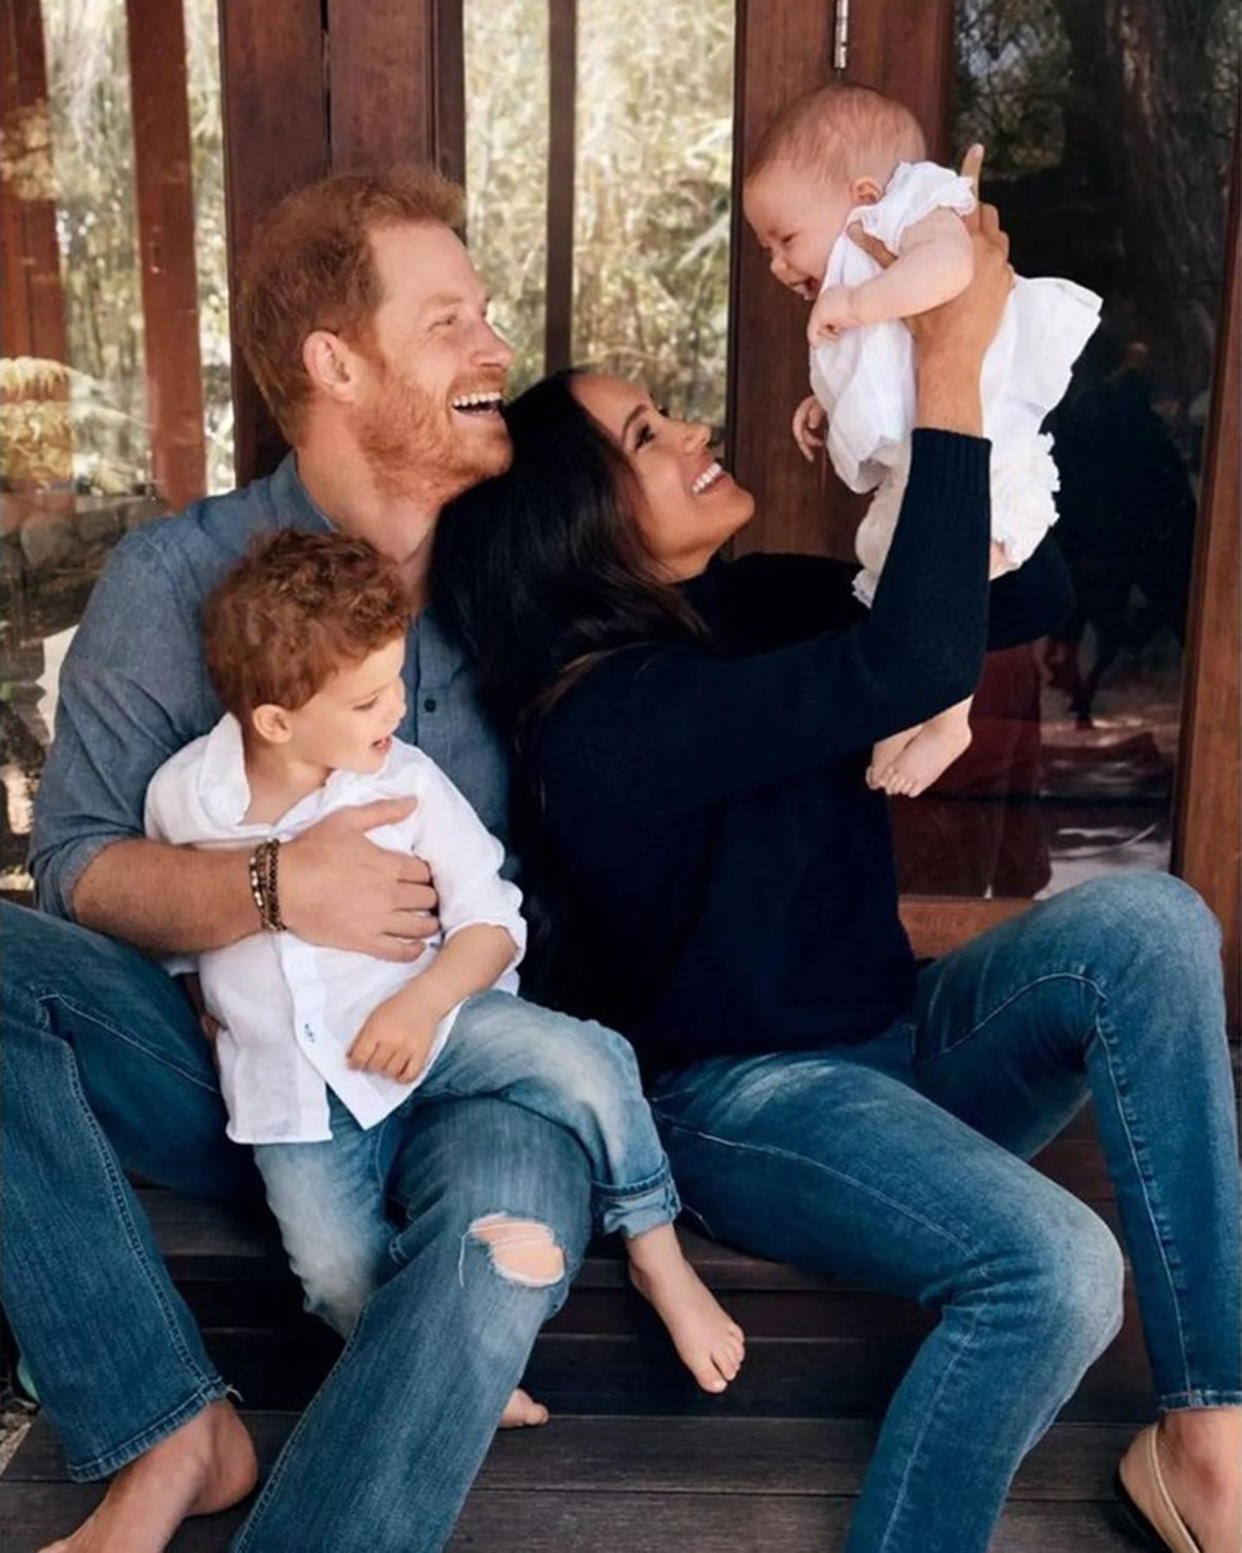 Prince Harry and Meghan Markle with their family. (Alexi Lubomirski / Courtesy Archewell Foundation)